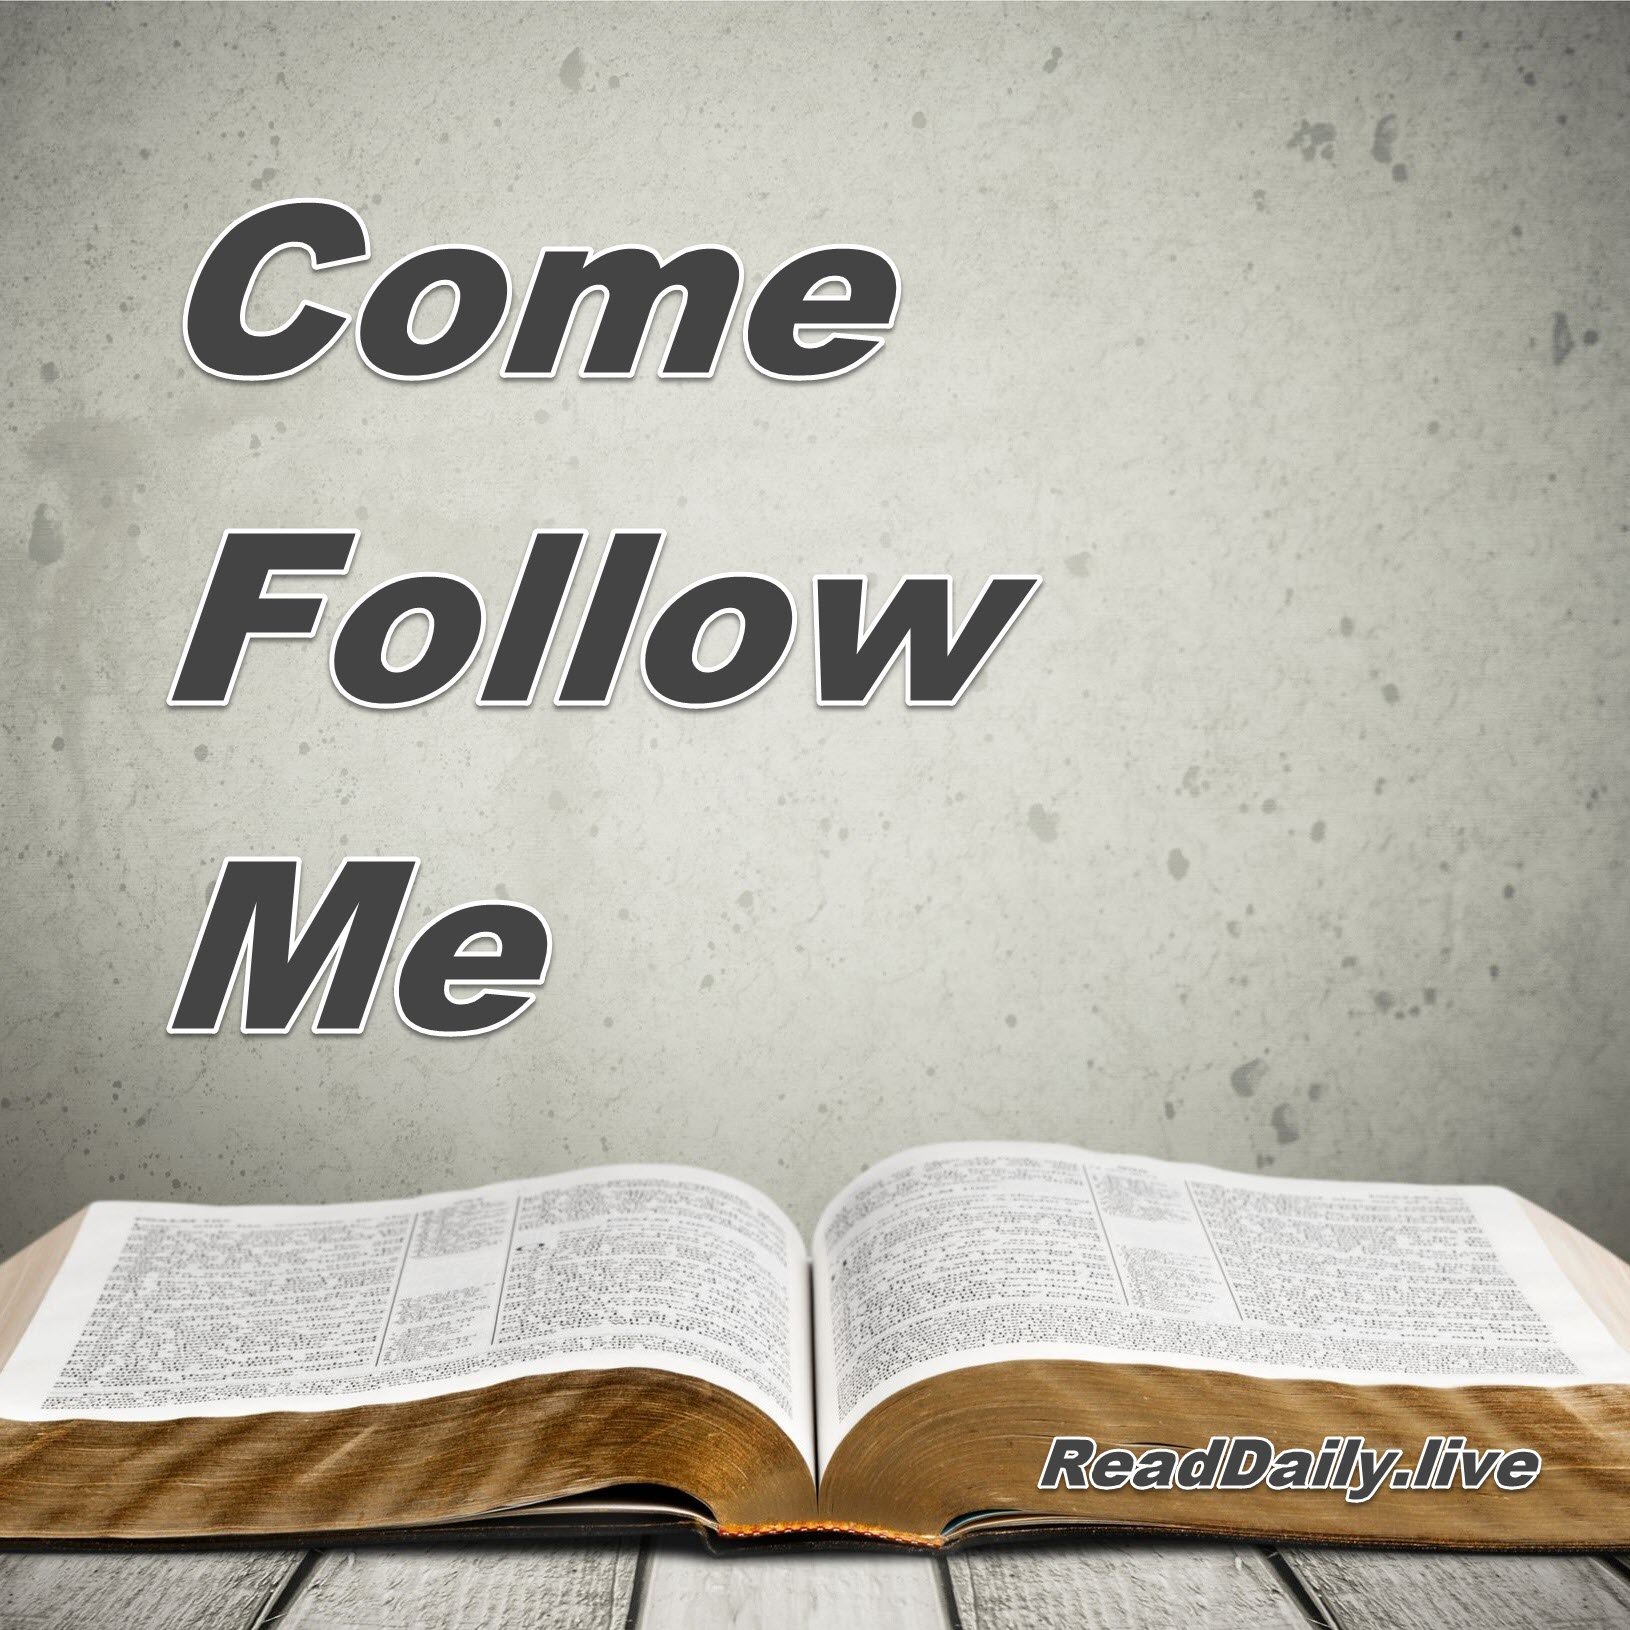 Welcome to the Come Follow Me podcast found on https://t.co/vYQHboqU7H. The purpose of this podcast series is to present the “Come Follow Me” lesson material in an easy